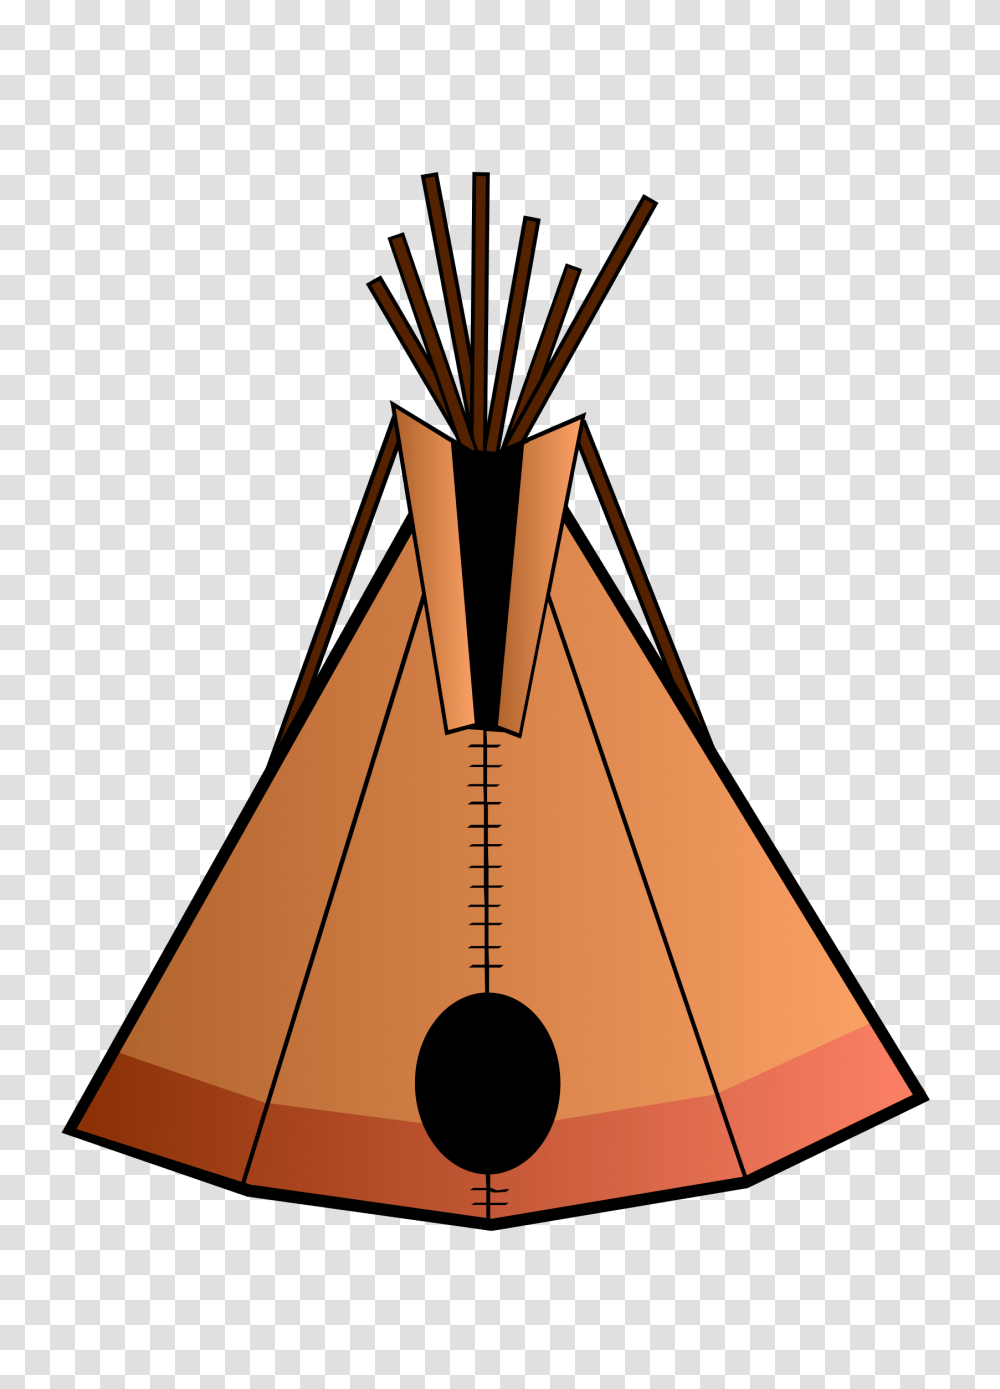 Teepee Icons, Lamp, Wood, Triangle, Plywood Transparent Png